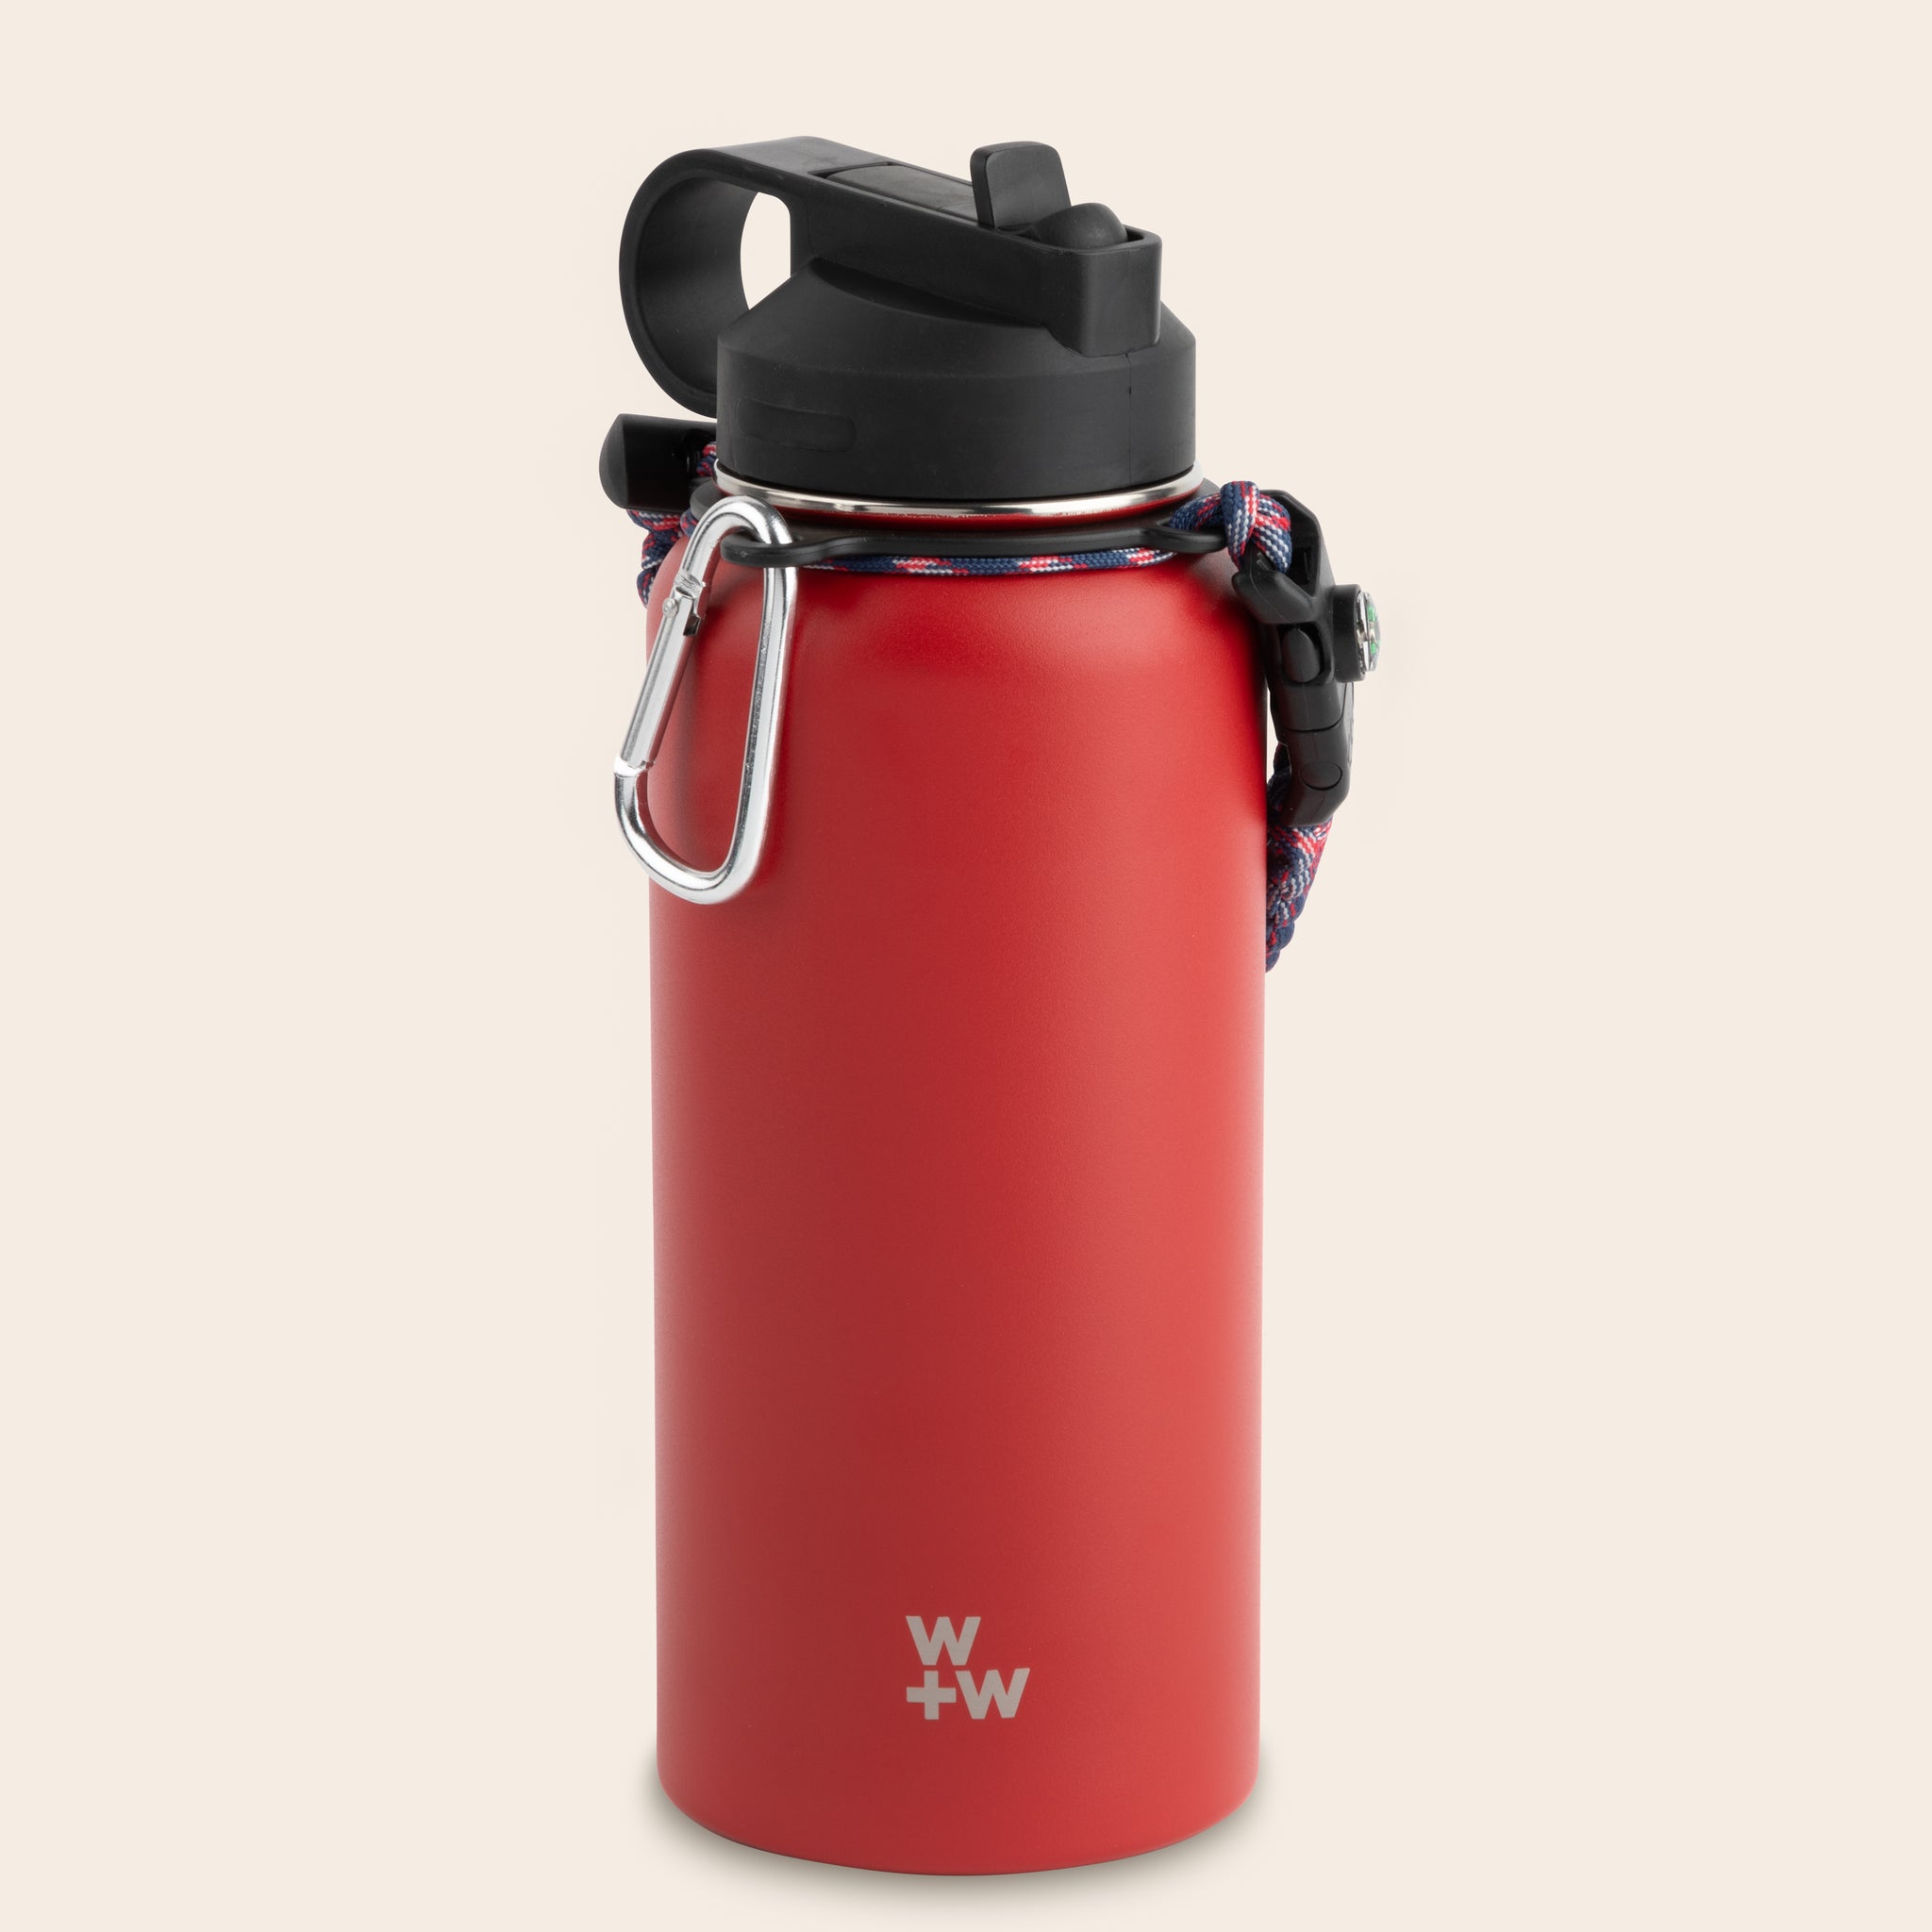 I'm cheap, (or smart?), but instead of a $30 hydro flask cup